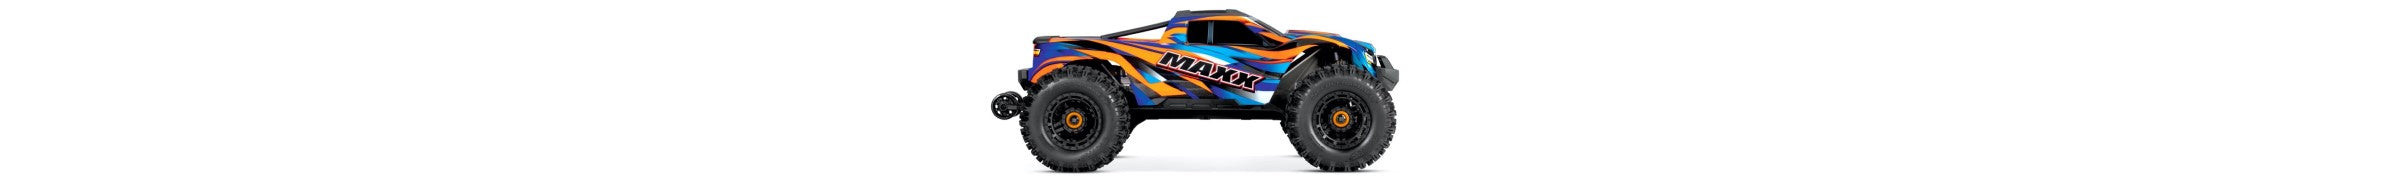 Parts For TRA-89086-4 Traxxas Maxx V2 With WideMAXX 1/10 Electric RC Monster Truck